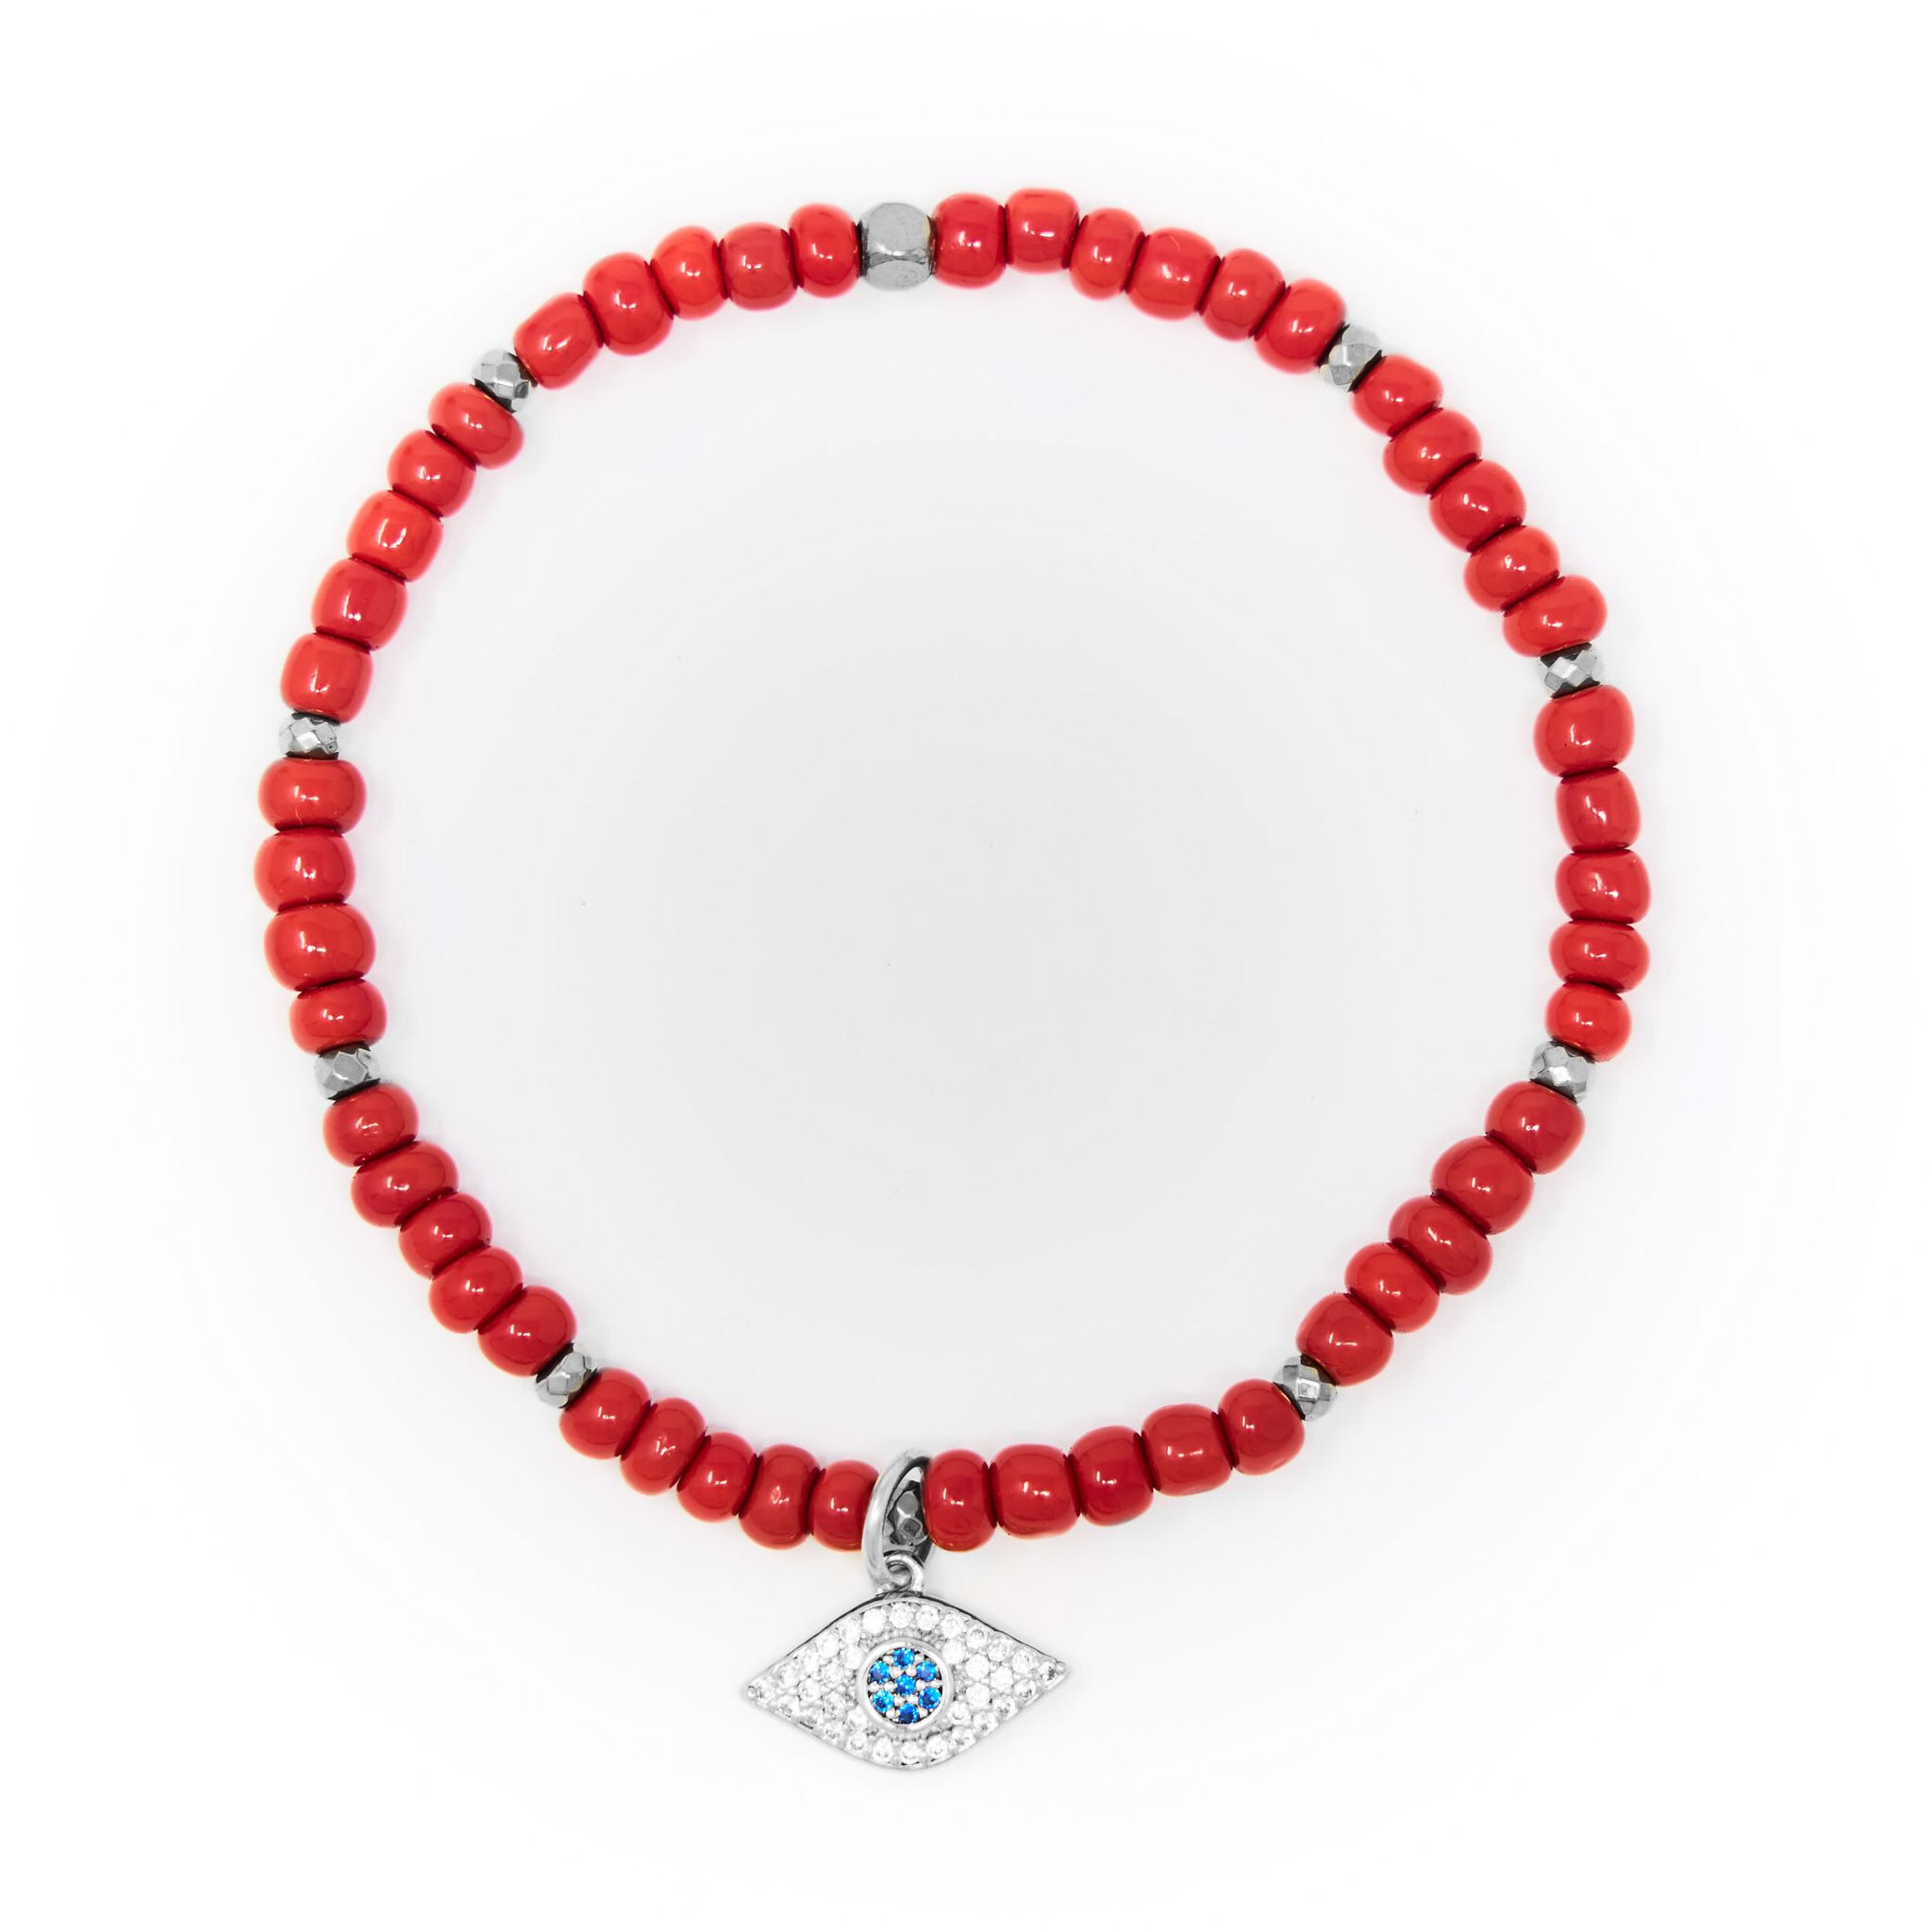 Red Sand Beads with Silver Bracelet, Silver Evil Eye Charm with Clear and Blue Zirconia